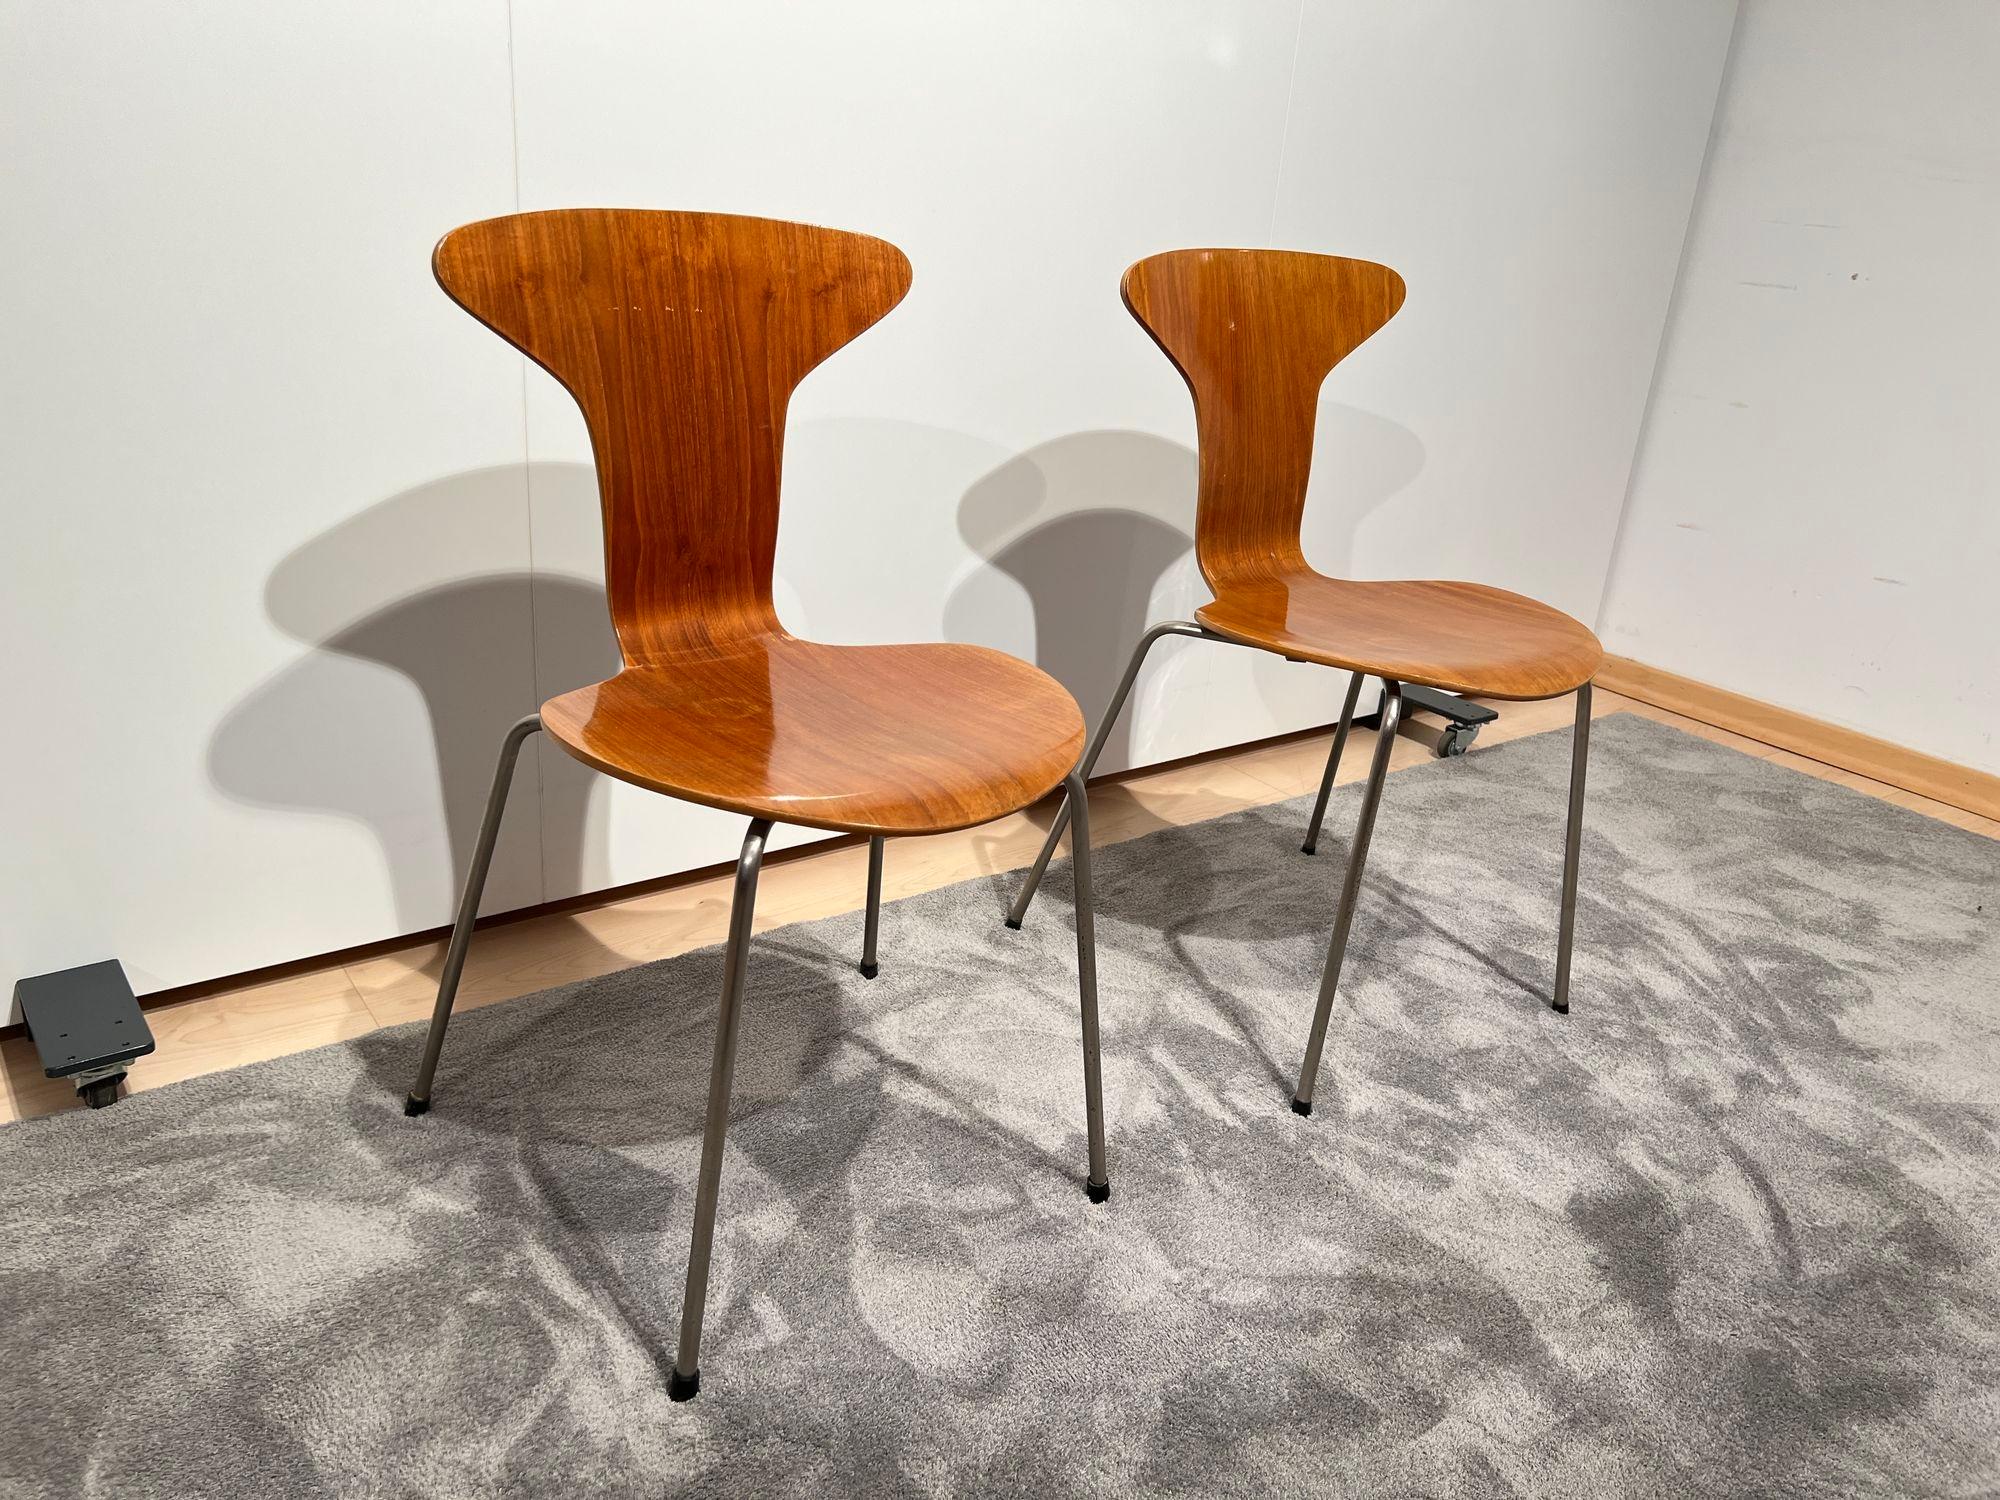 Stainless Steel Pair of 3105 'Mosquito' Chairs by Arne Jacobsen, F. Hansen, Teak, Denmark, 1950s For Sale